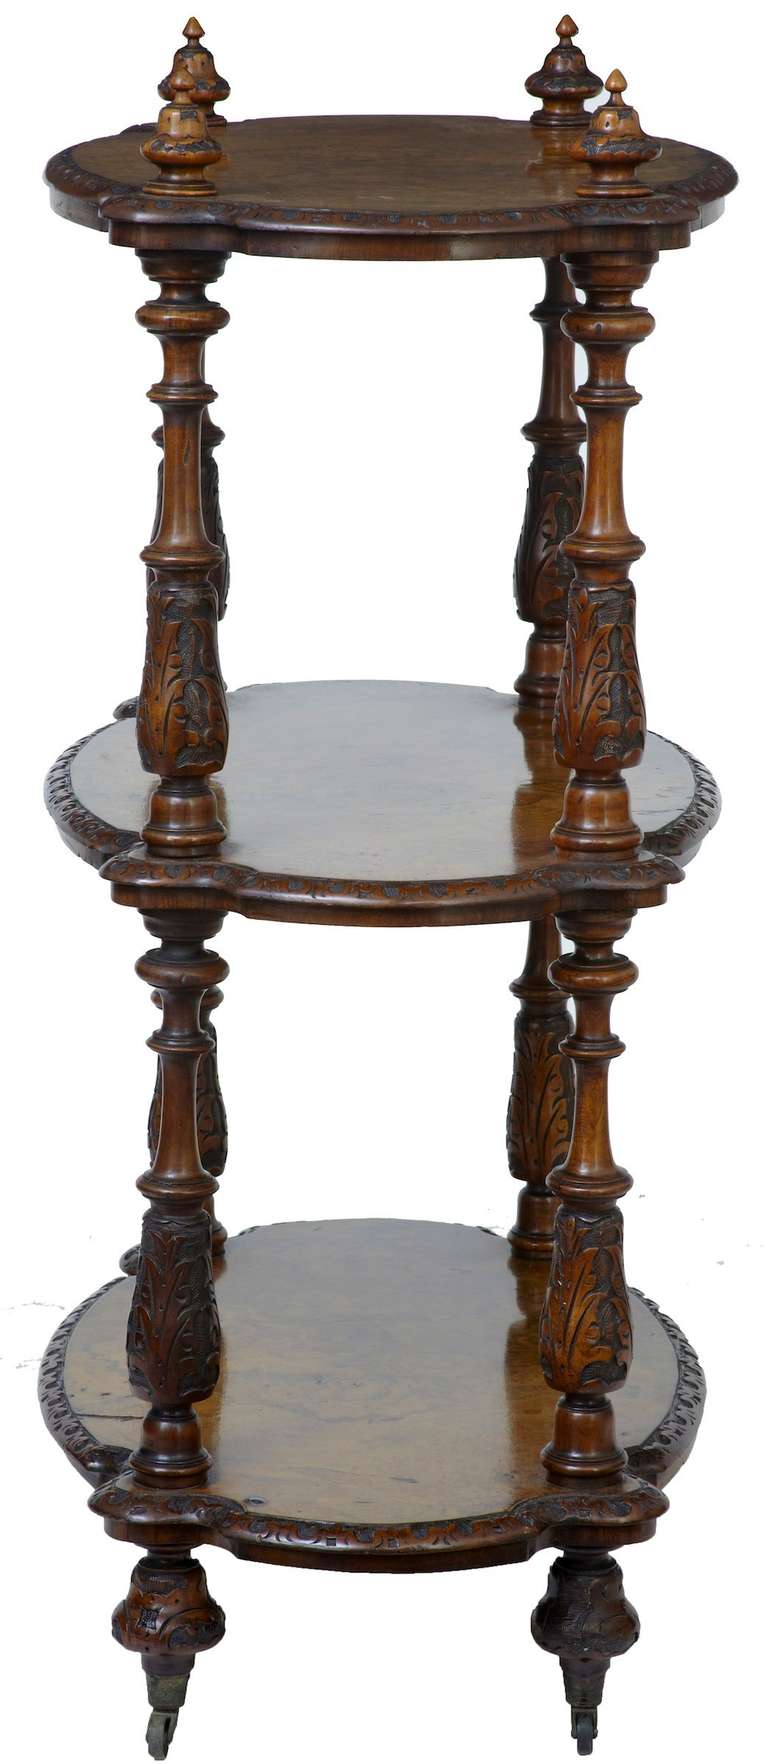 19th century High Victorian carved walnut whatnot.